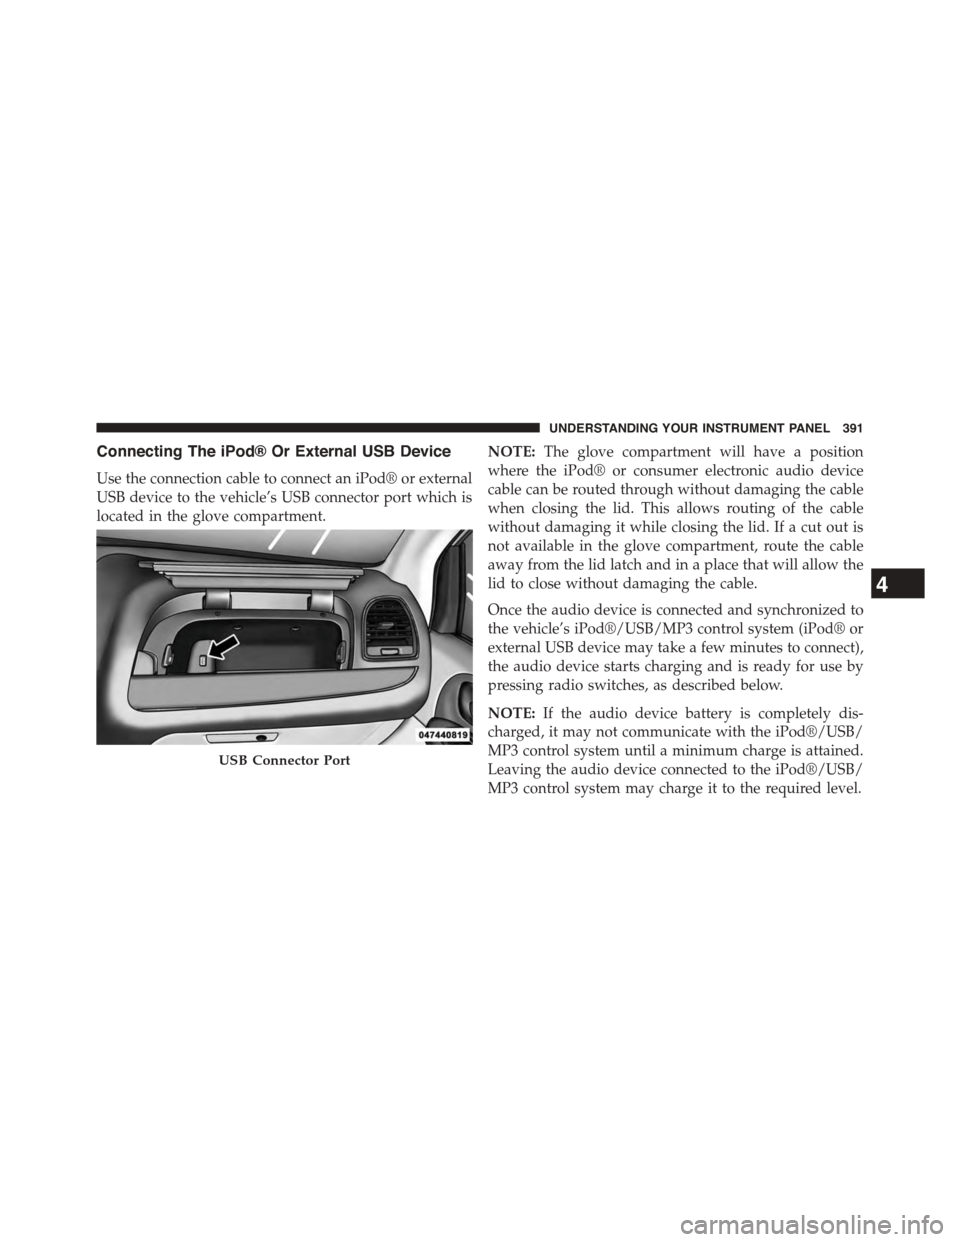 CHRYSLER TOWN AND COUNTRY 2015 5.G Owners Manual Connecting The iPod® Or External USB Device
Use the connection cable to connect an iPod® or external
USB device to the vehicle’s USB connector port which is
located in the glove compartment.
NOTE: